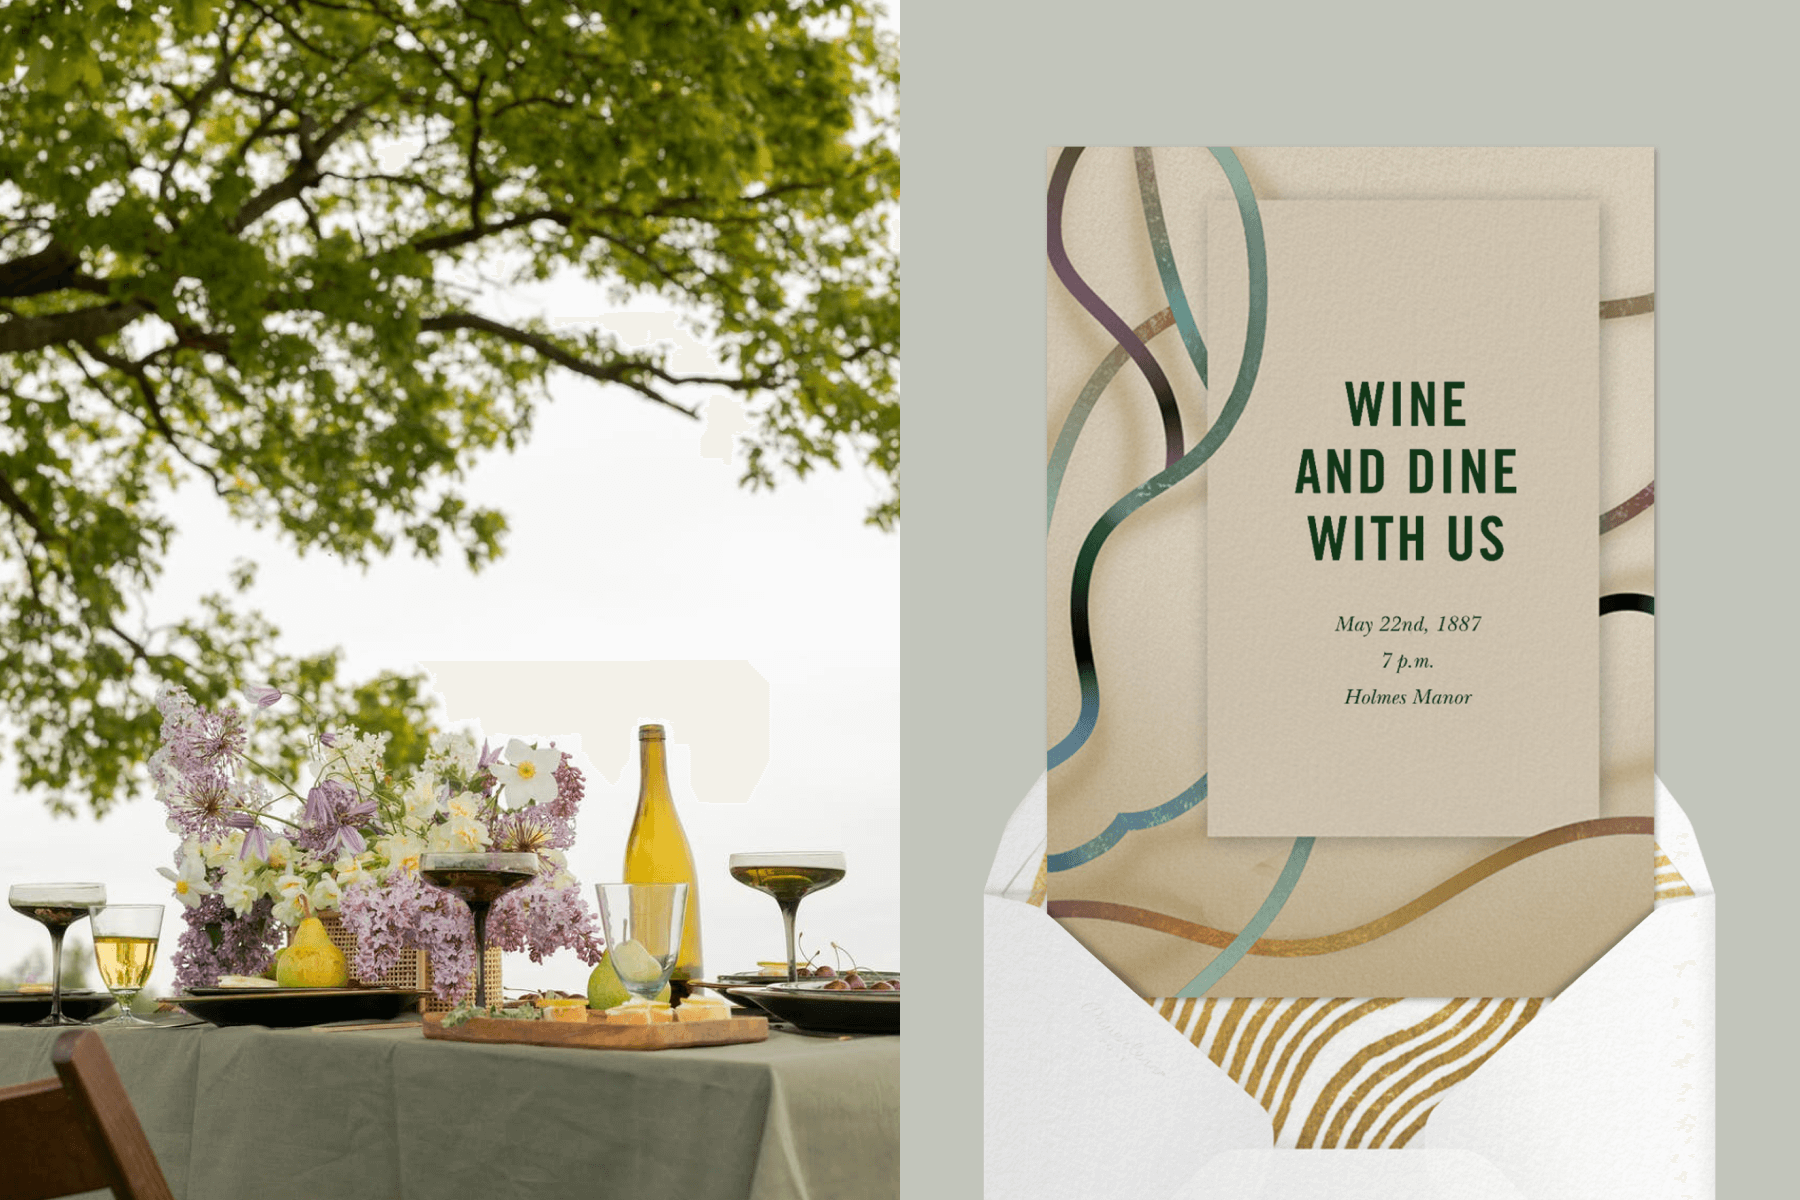 Left: Flowers and wine on a table under a tree; Right: A wine tasting event invitationwith iridescent lines.